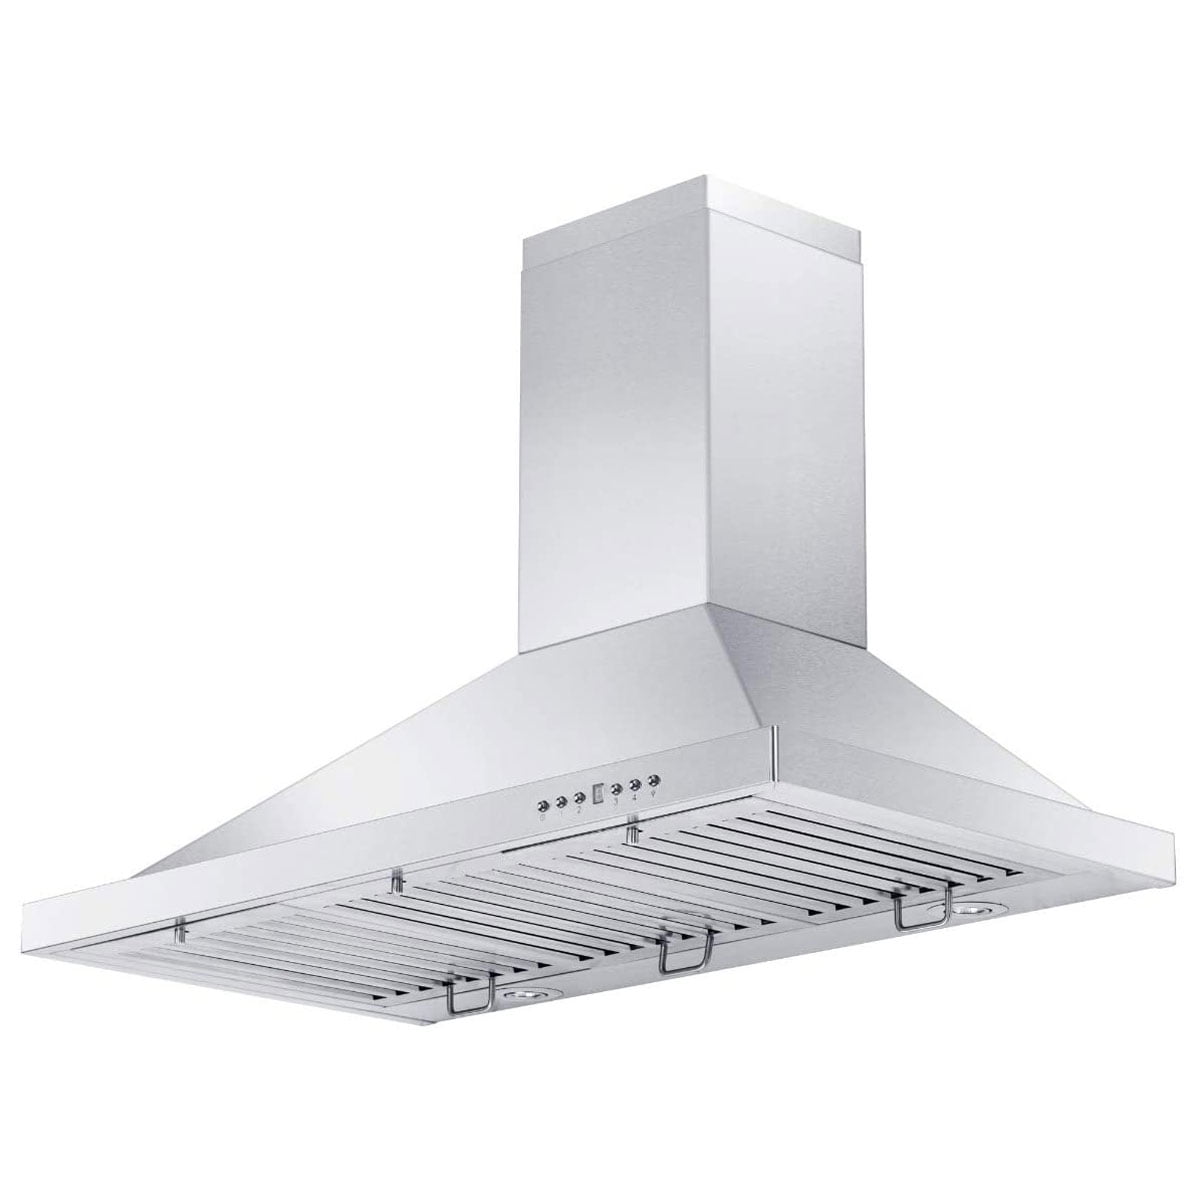 IKTCH Range Hood 30 Inch Built-in/Insert Range Hood Insert 900 CFM,  Ducted/Ductless Convertible Duct,Kitchen Vent Hood with 2 Pcs Adjustable  Lights and 2 Pcs Baffle Filters with Handlebar 